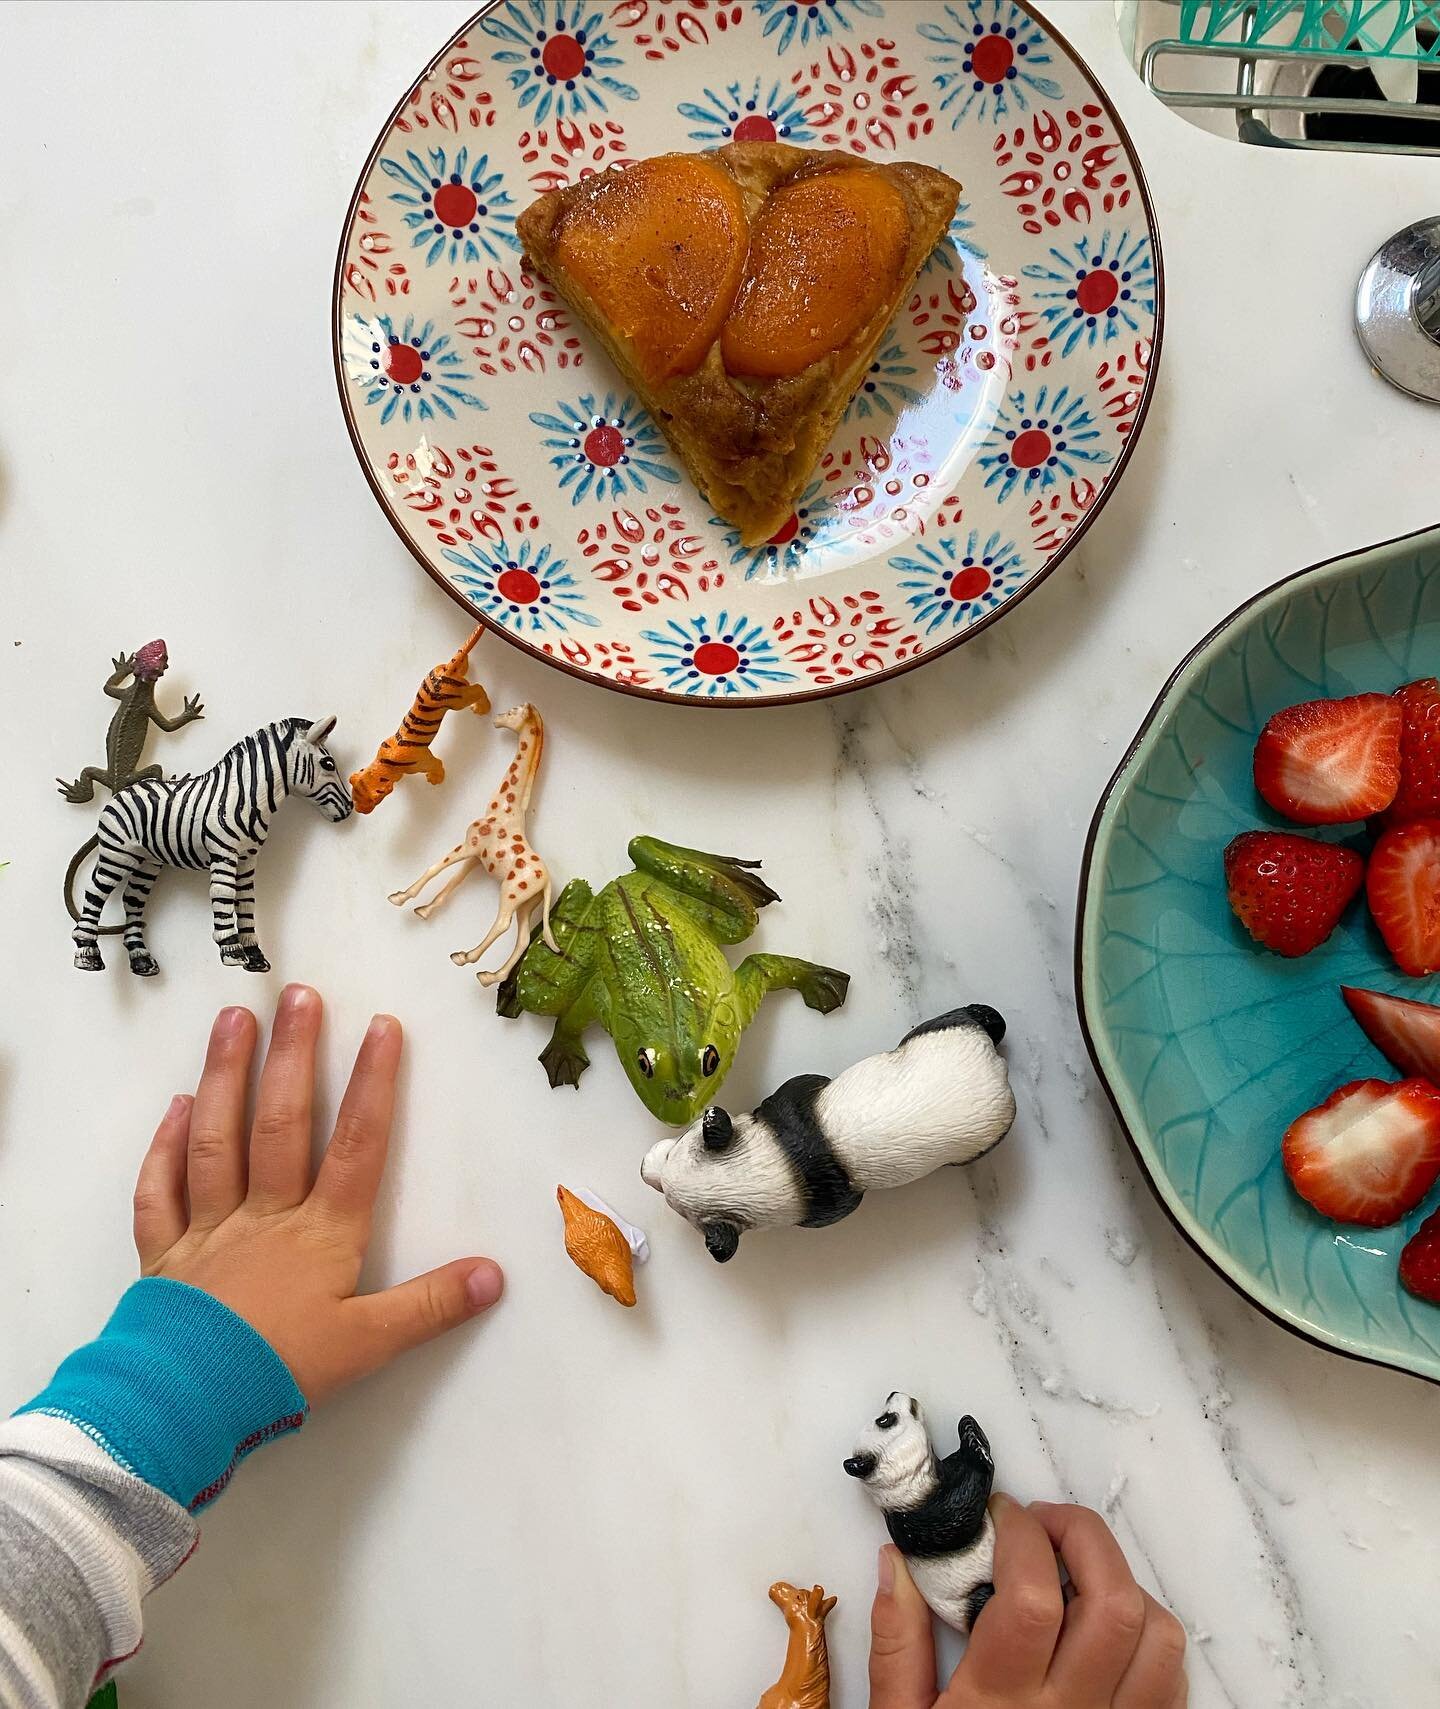 Morning menagerie. @alicelouisewaters Santa Rosa plum cake made with&hellip;apricots. Plus a tiny toddler hand for scale and his little zoo of animals. Happy Friday everyone!
&mdash;
#zoo #cake #baker #apricot #alicewatersrecipe #foodie #sweets #brea